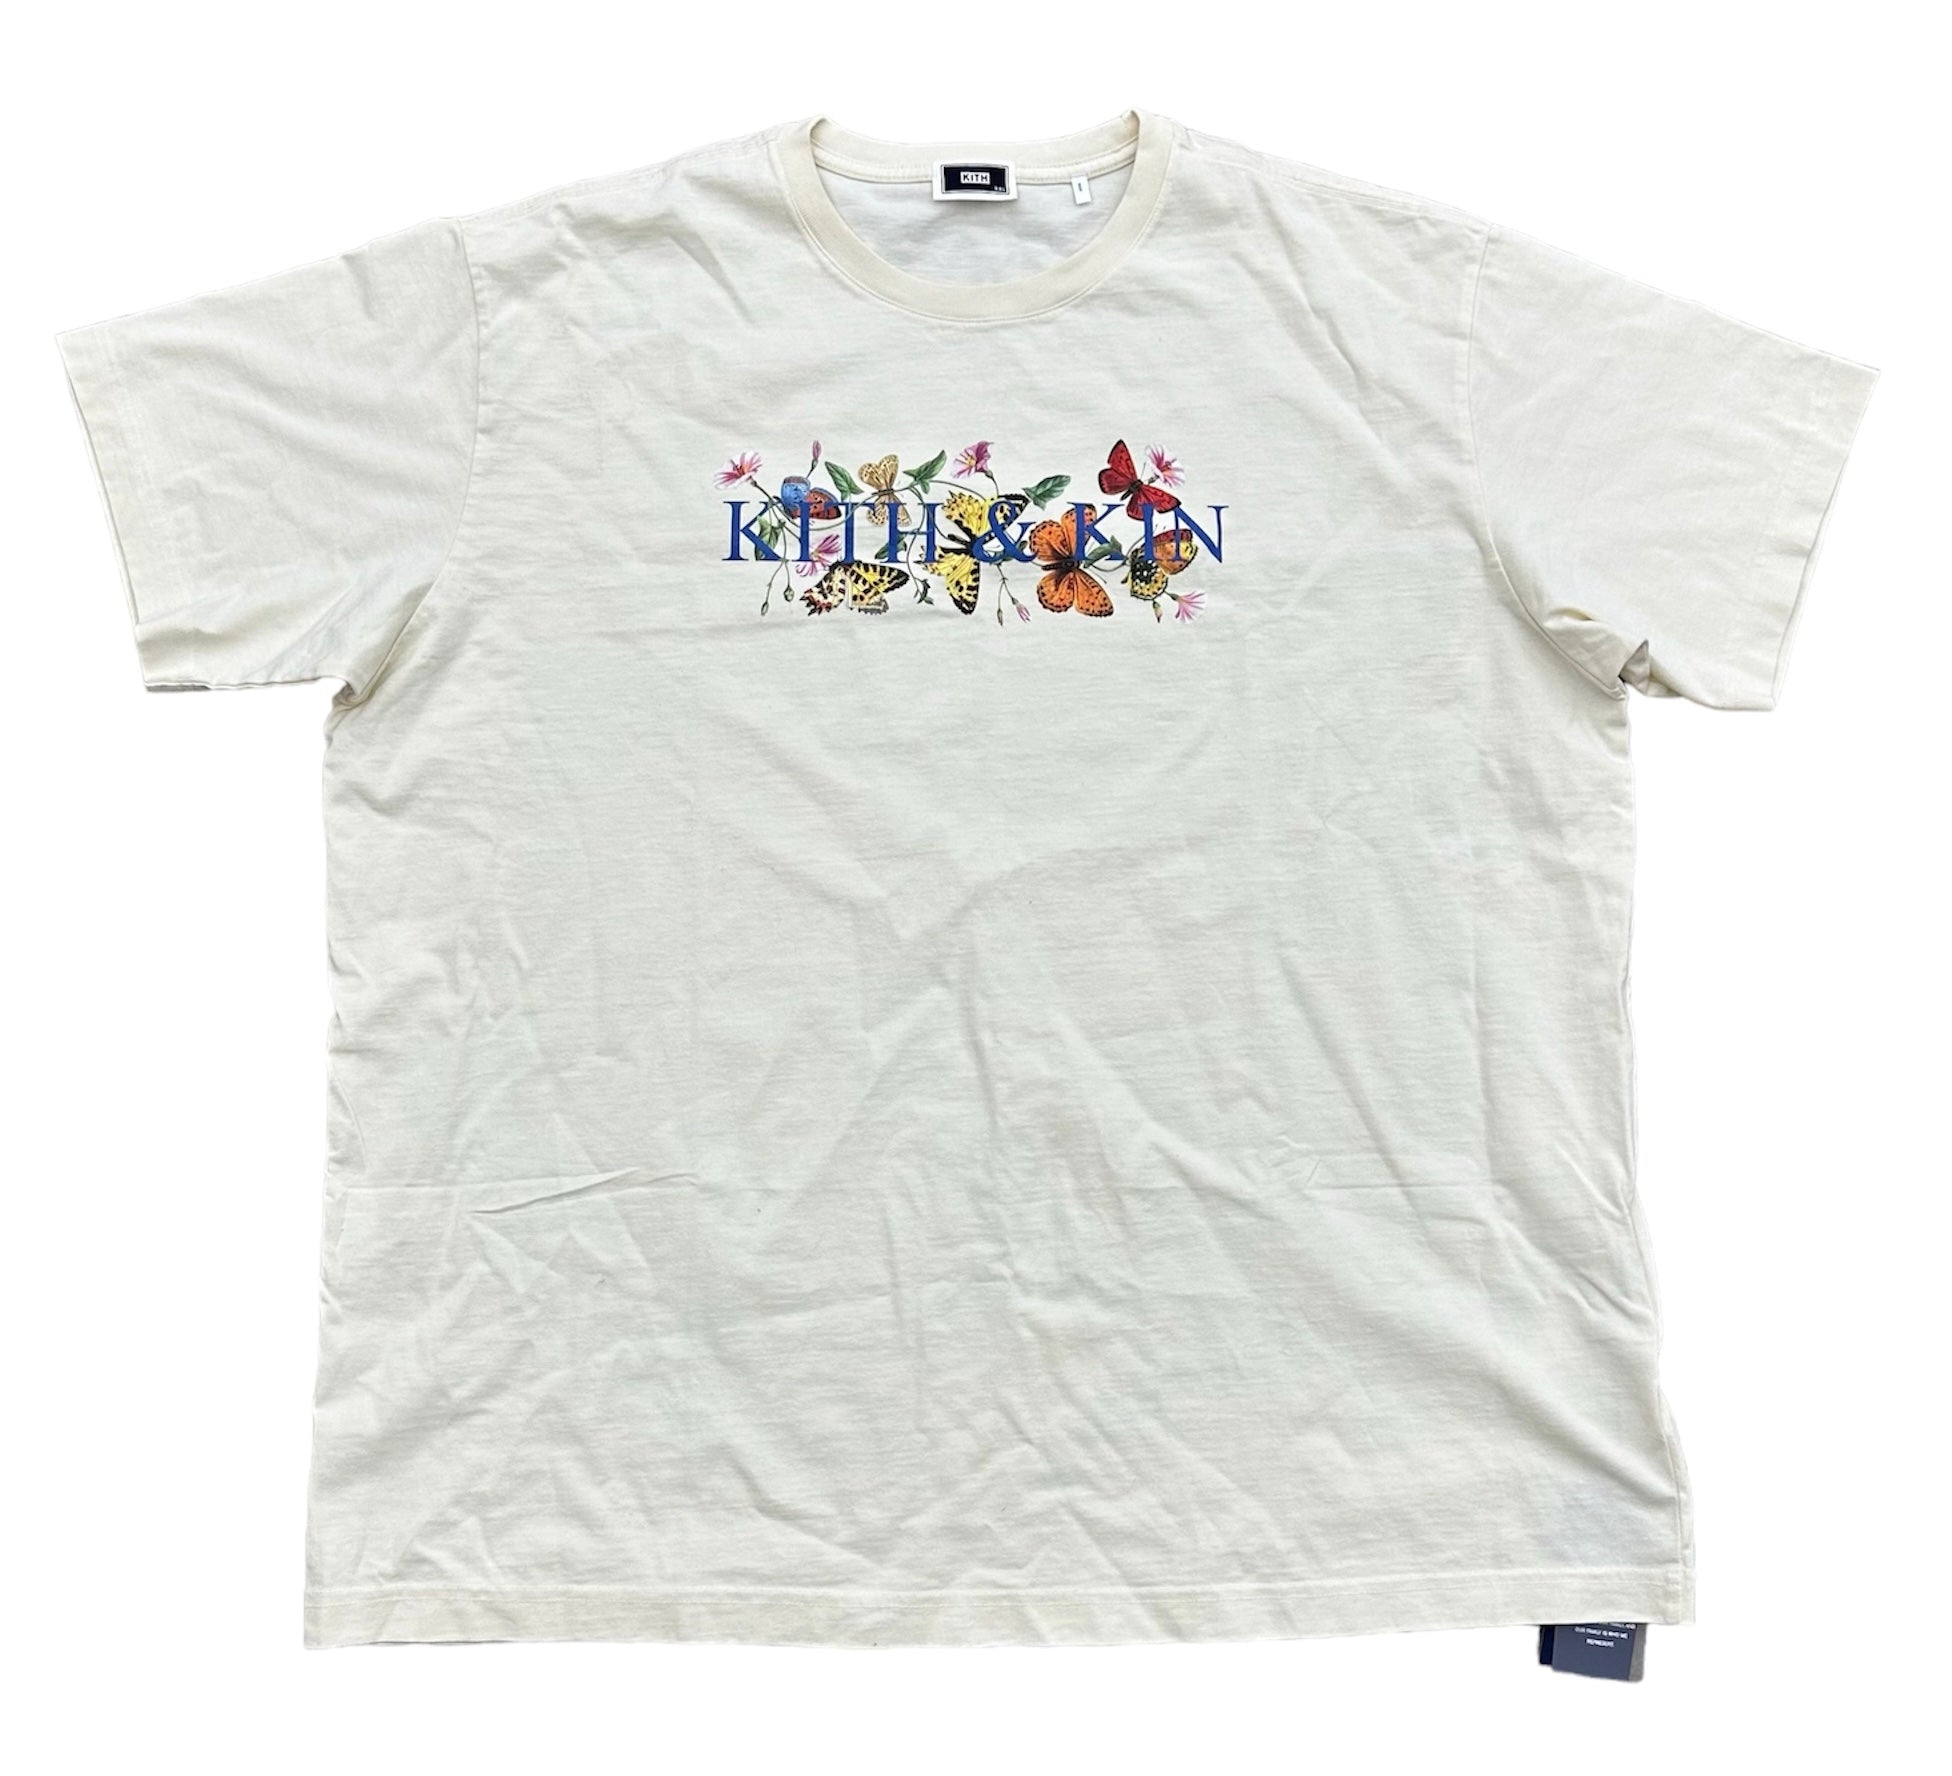 KITH AND KIN BUTTERFLY TEE